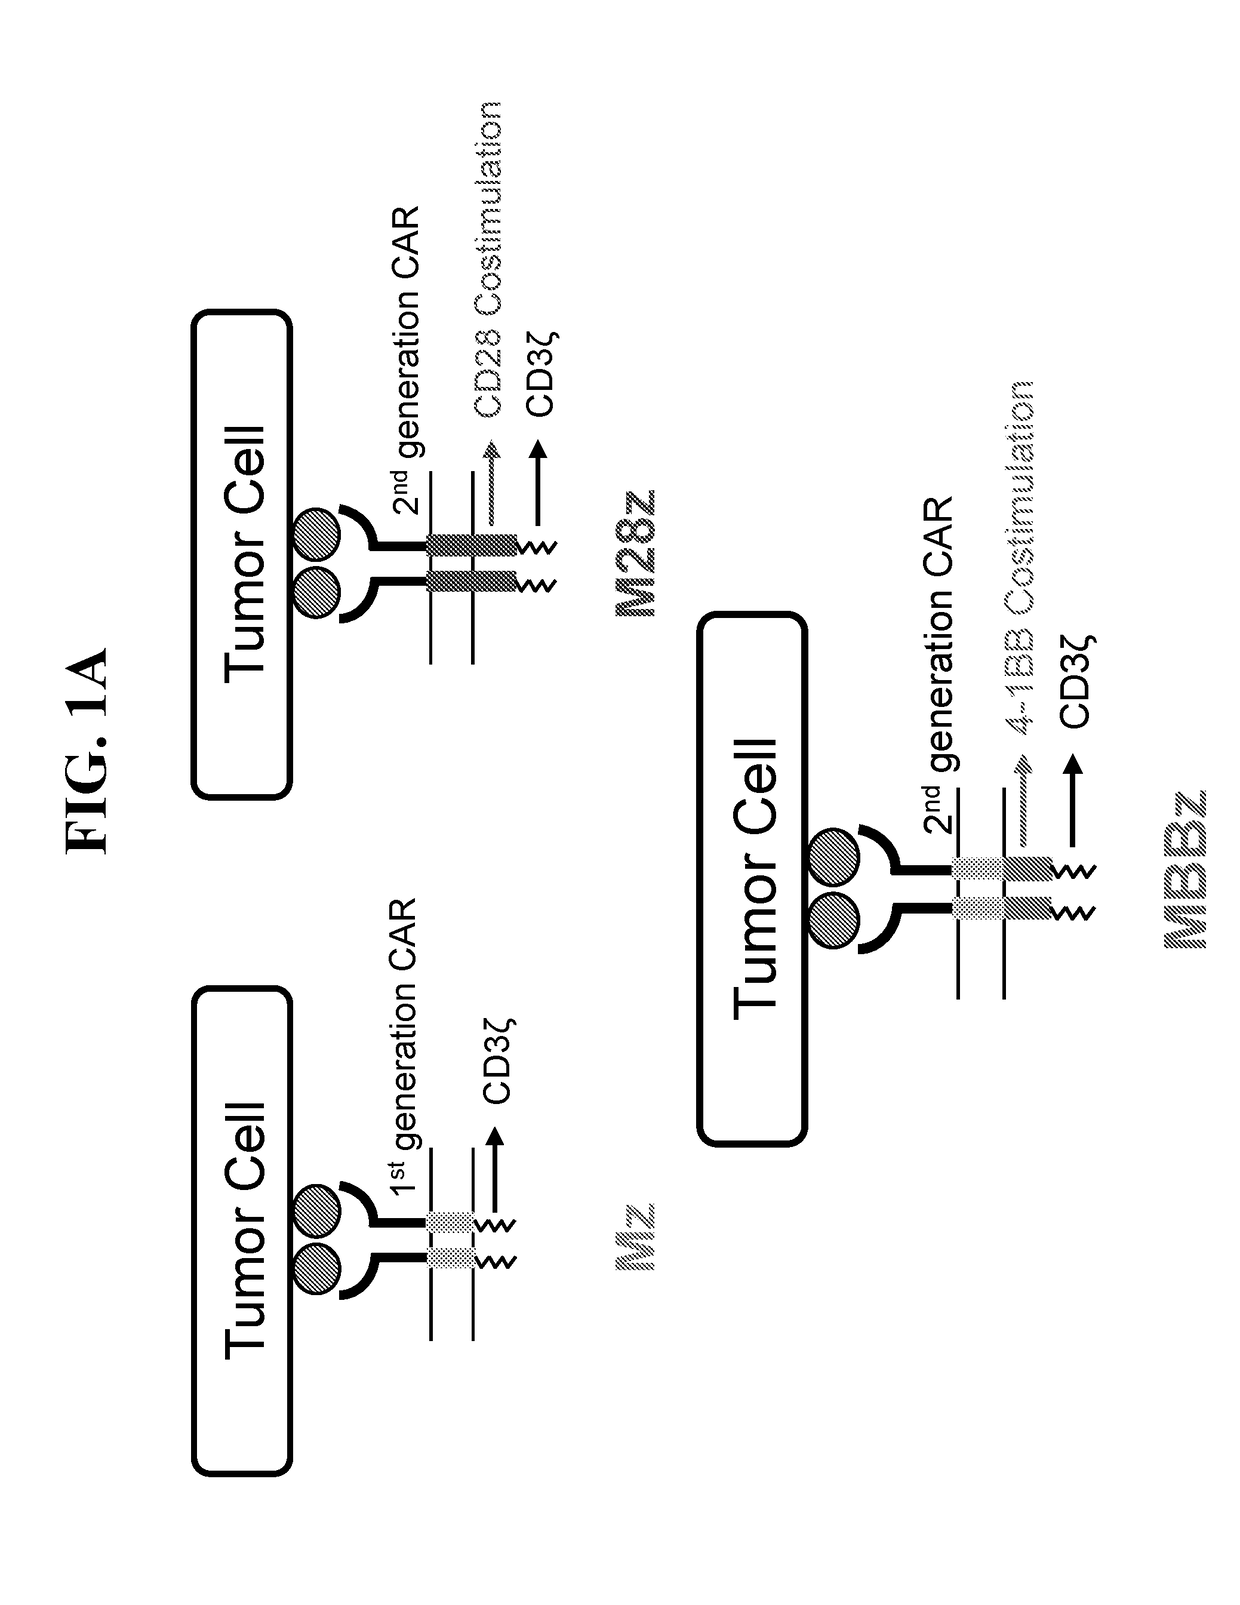 Immune cell compositions and methods of using same